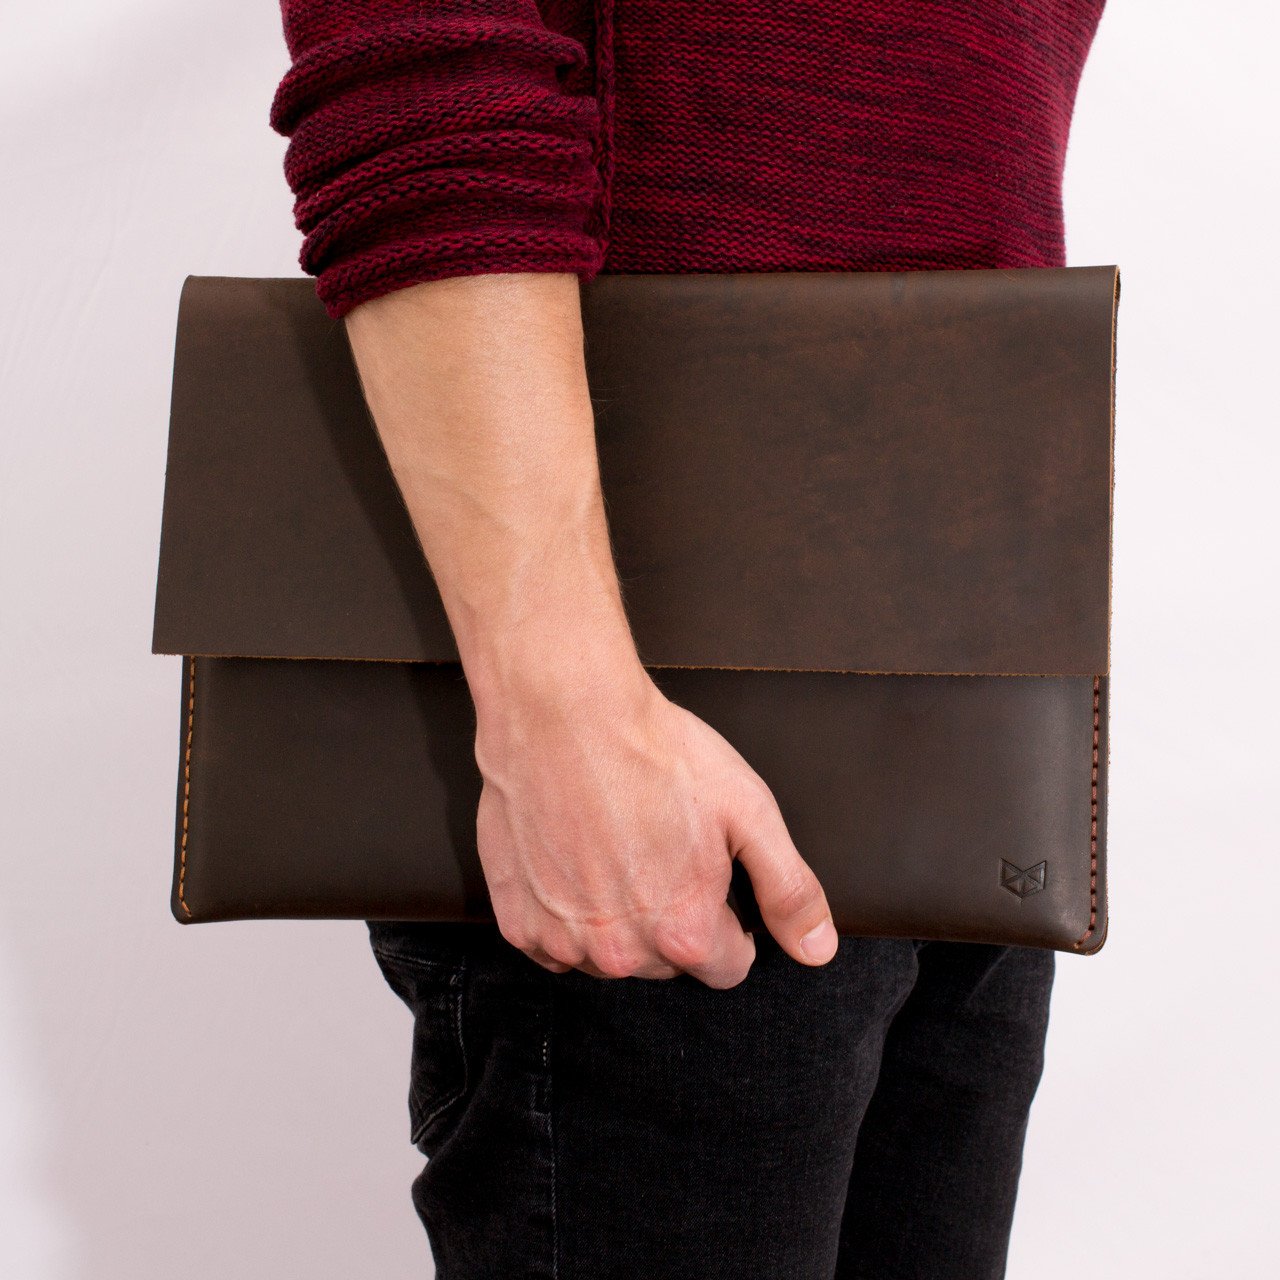 Carrying the new Google Pixelbook laptop" leather sleeve